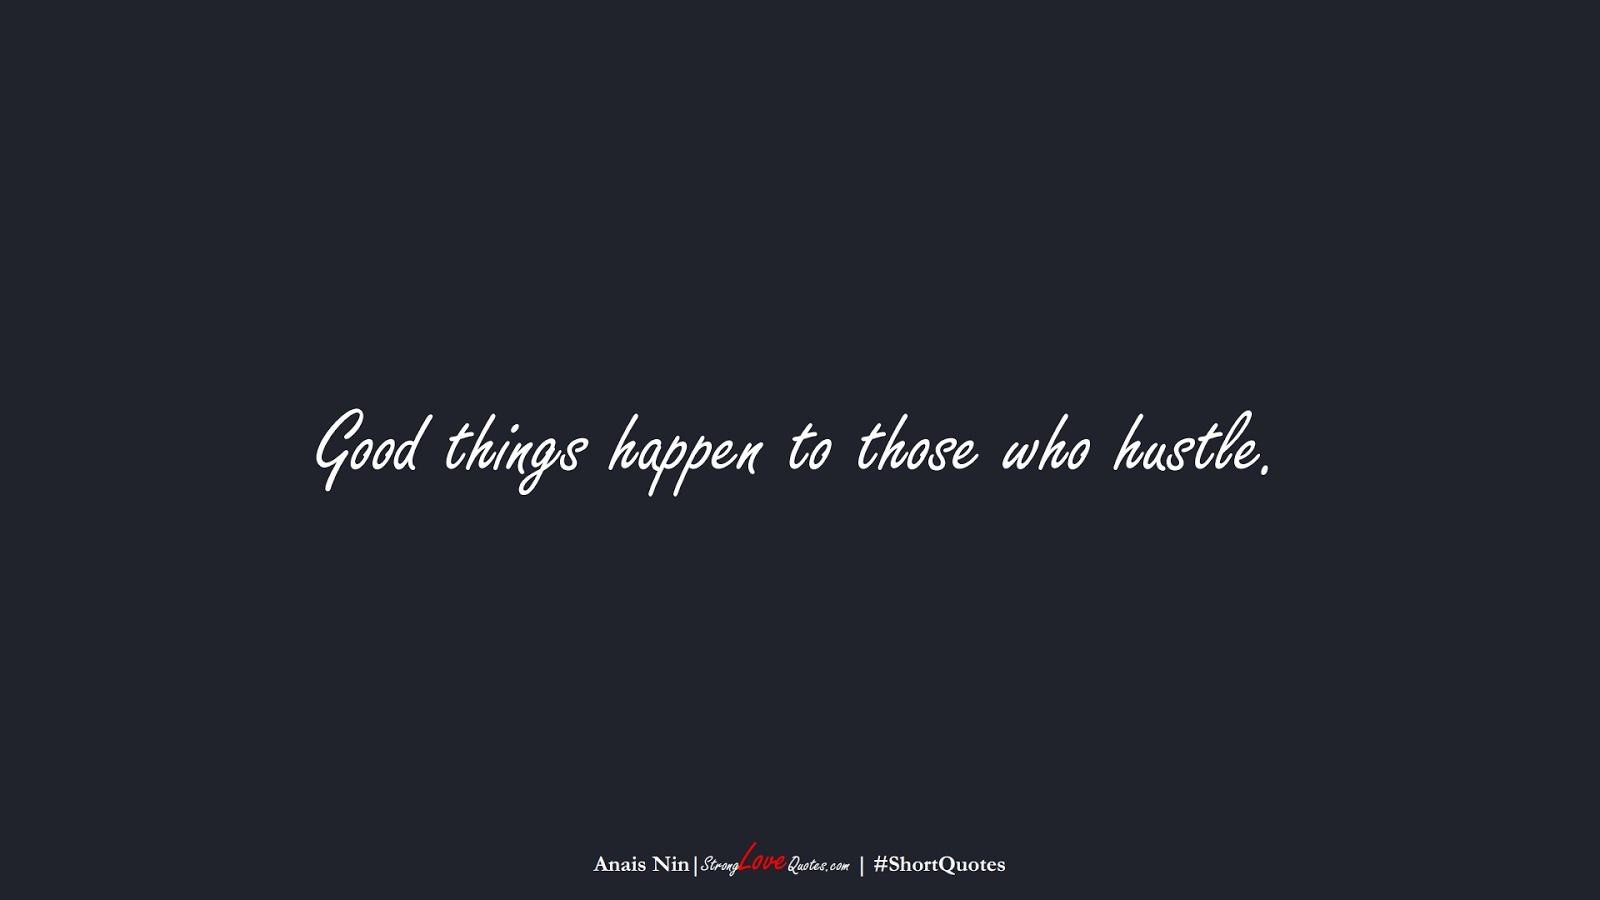 Good things happen to those who hustle. (Anais Nin);  #ShortQuotes